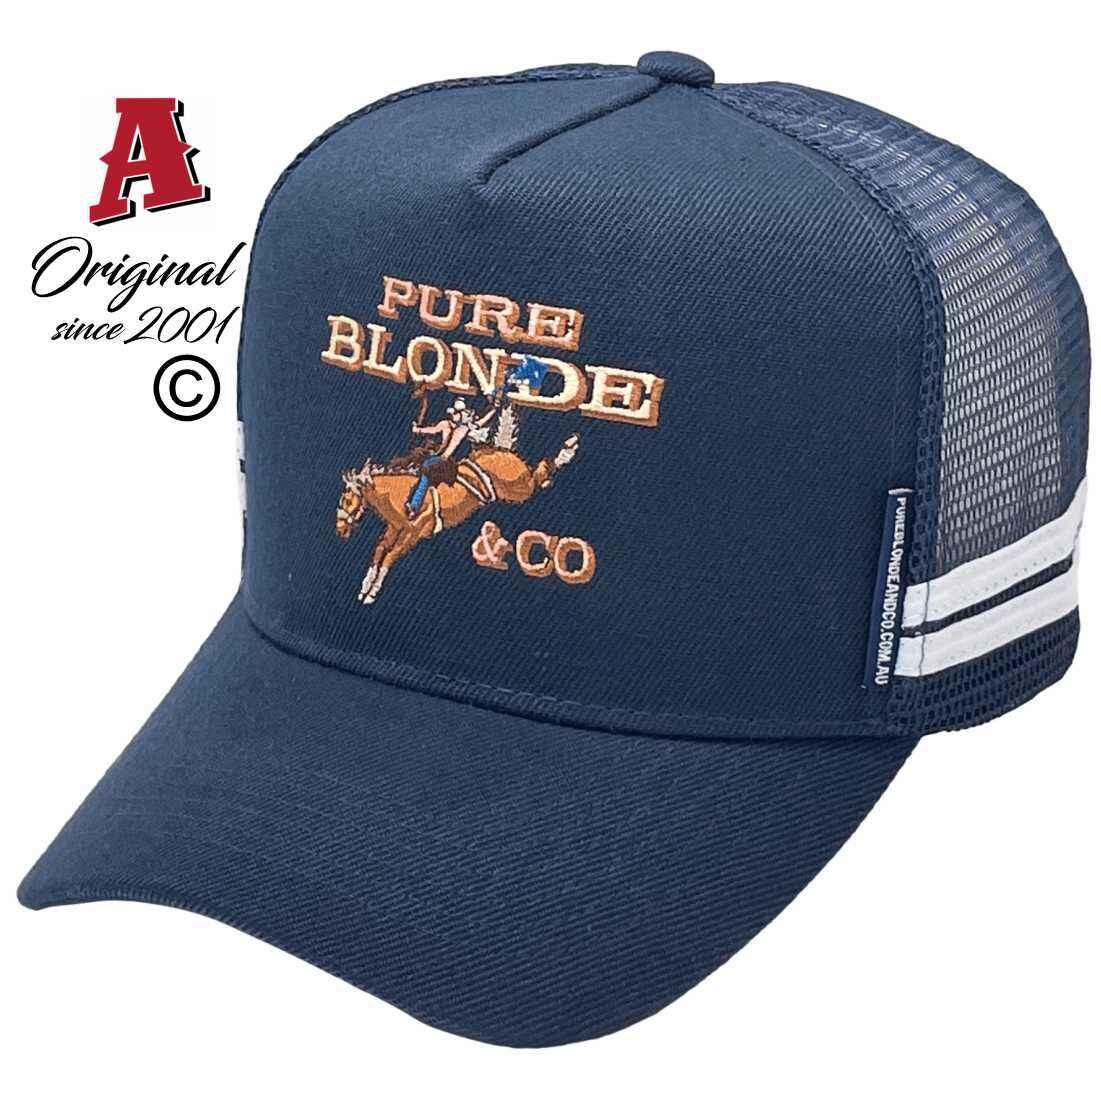 Pure Blond Co Dubbo NSW HP Basic Aussie Trucker Hats with 2 SideBands and Australian HeadFit Crown Navy White